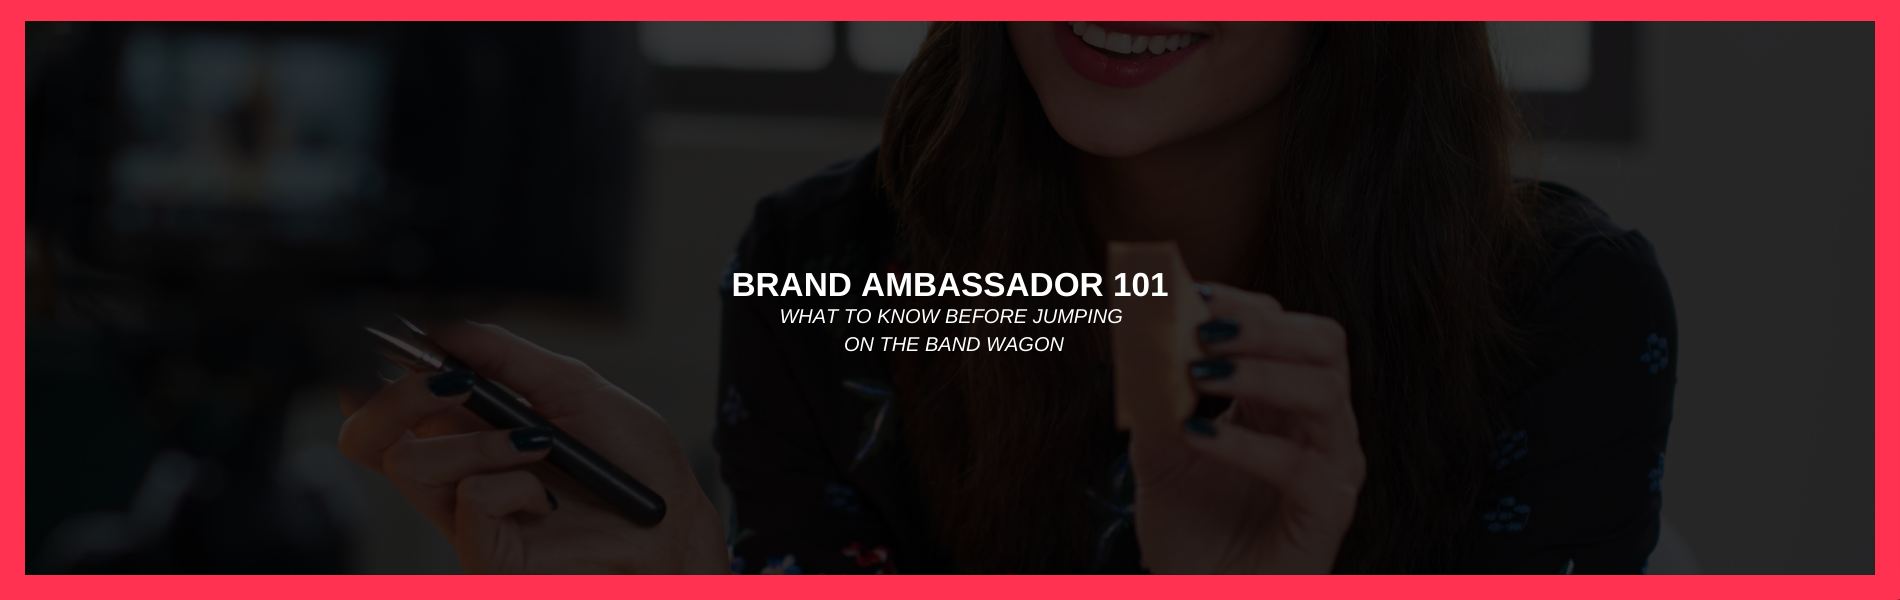 Brand Ambassador 101: What to Know Before Jumping on the Band Wagon